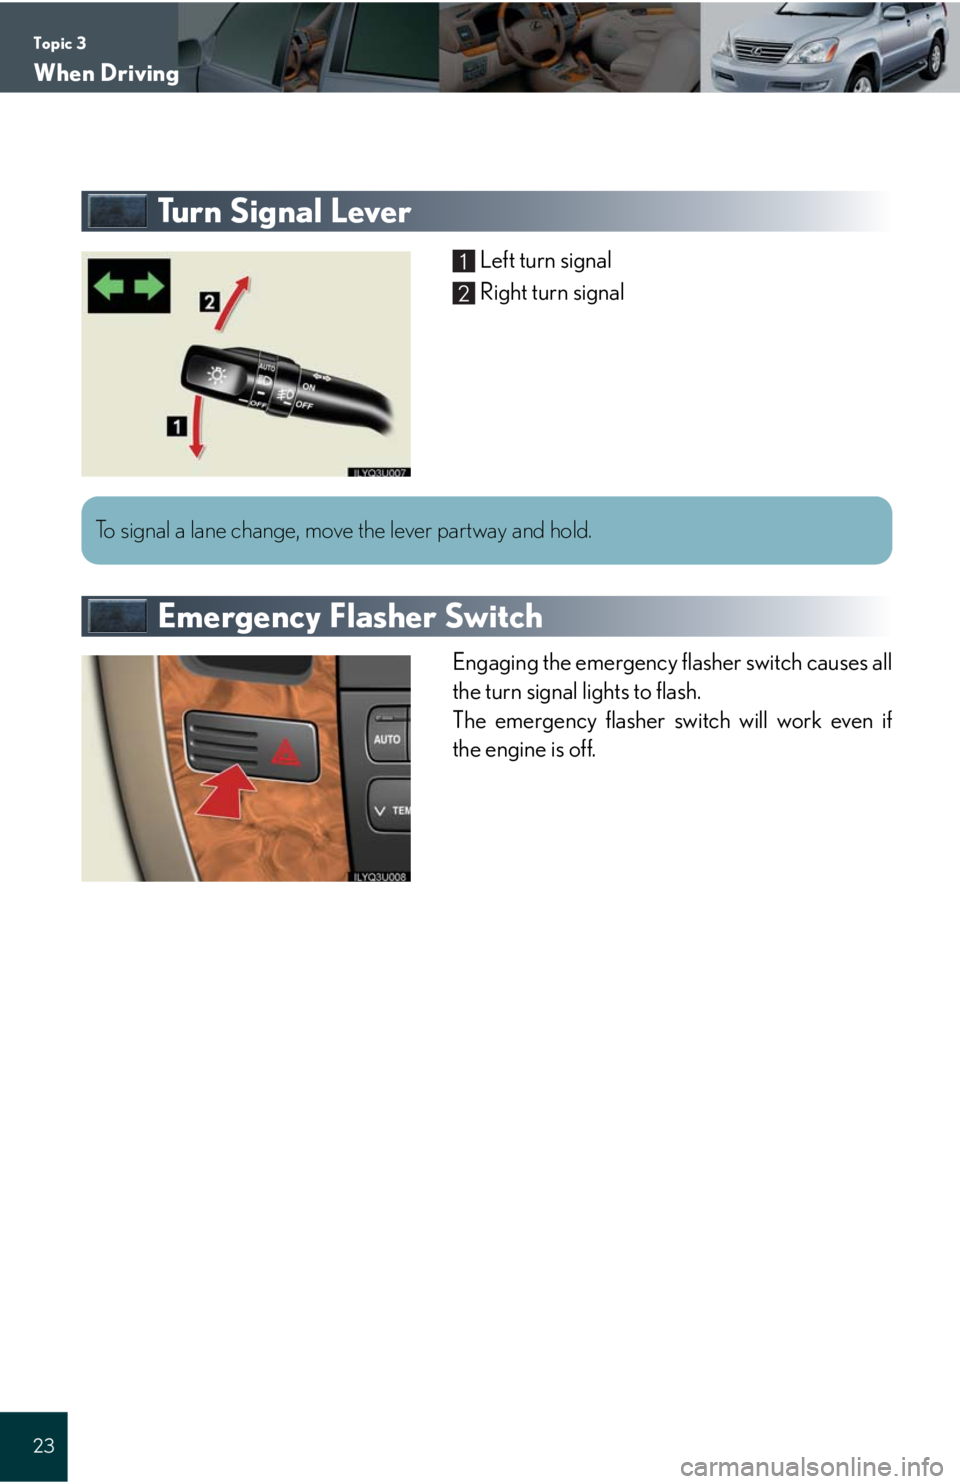 Lexus GX470 2008  Refueling / LEXUS 2008 GX470 QUICK GUIDE  (OM60D81U) Owners Guide Topic 3
When Driving
23
Tu r n  S i g n a l  L e v e r
Left turn signal
Right turn signal
Emergency Flasher Switch
Engaging the emergency flasher switch causes all
the turn signal lights to flash.
The